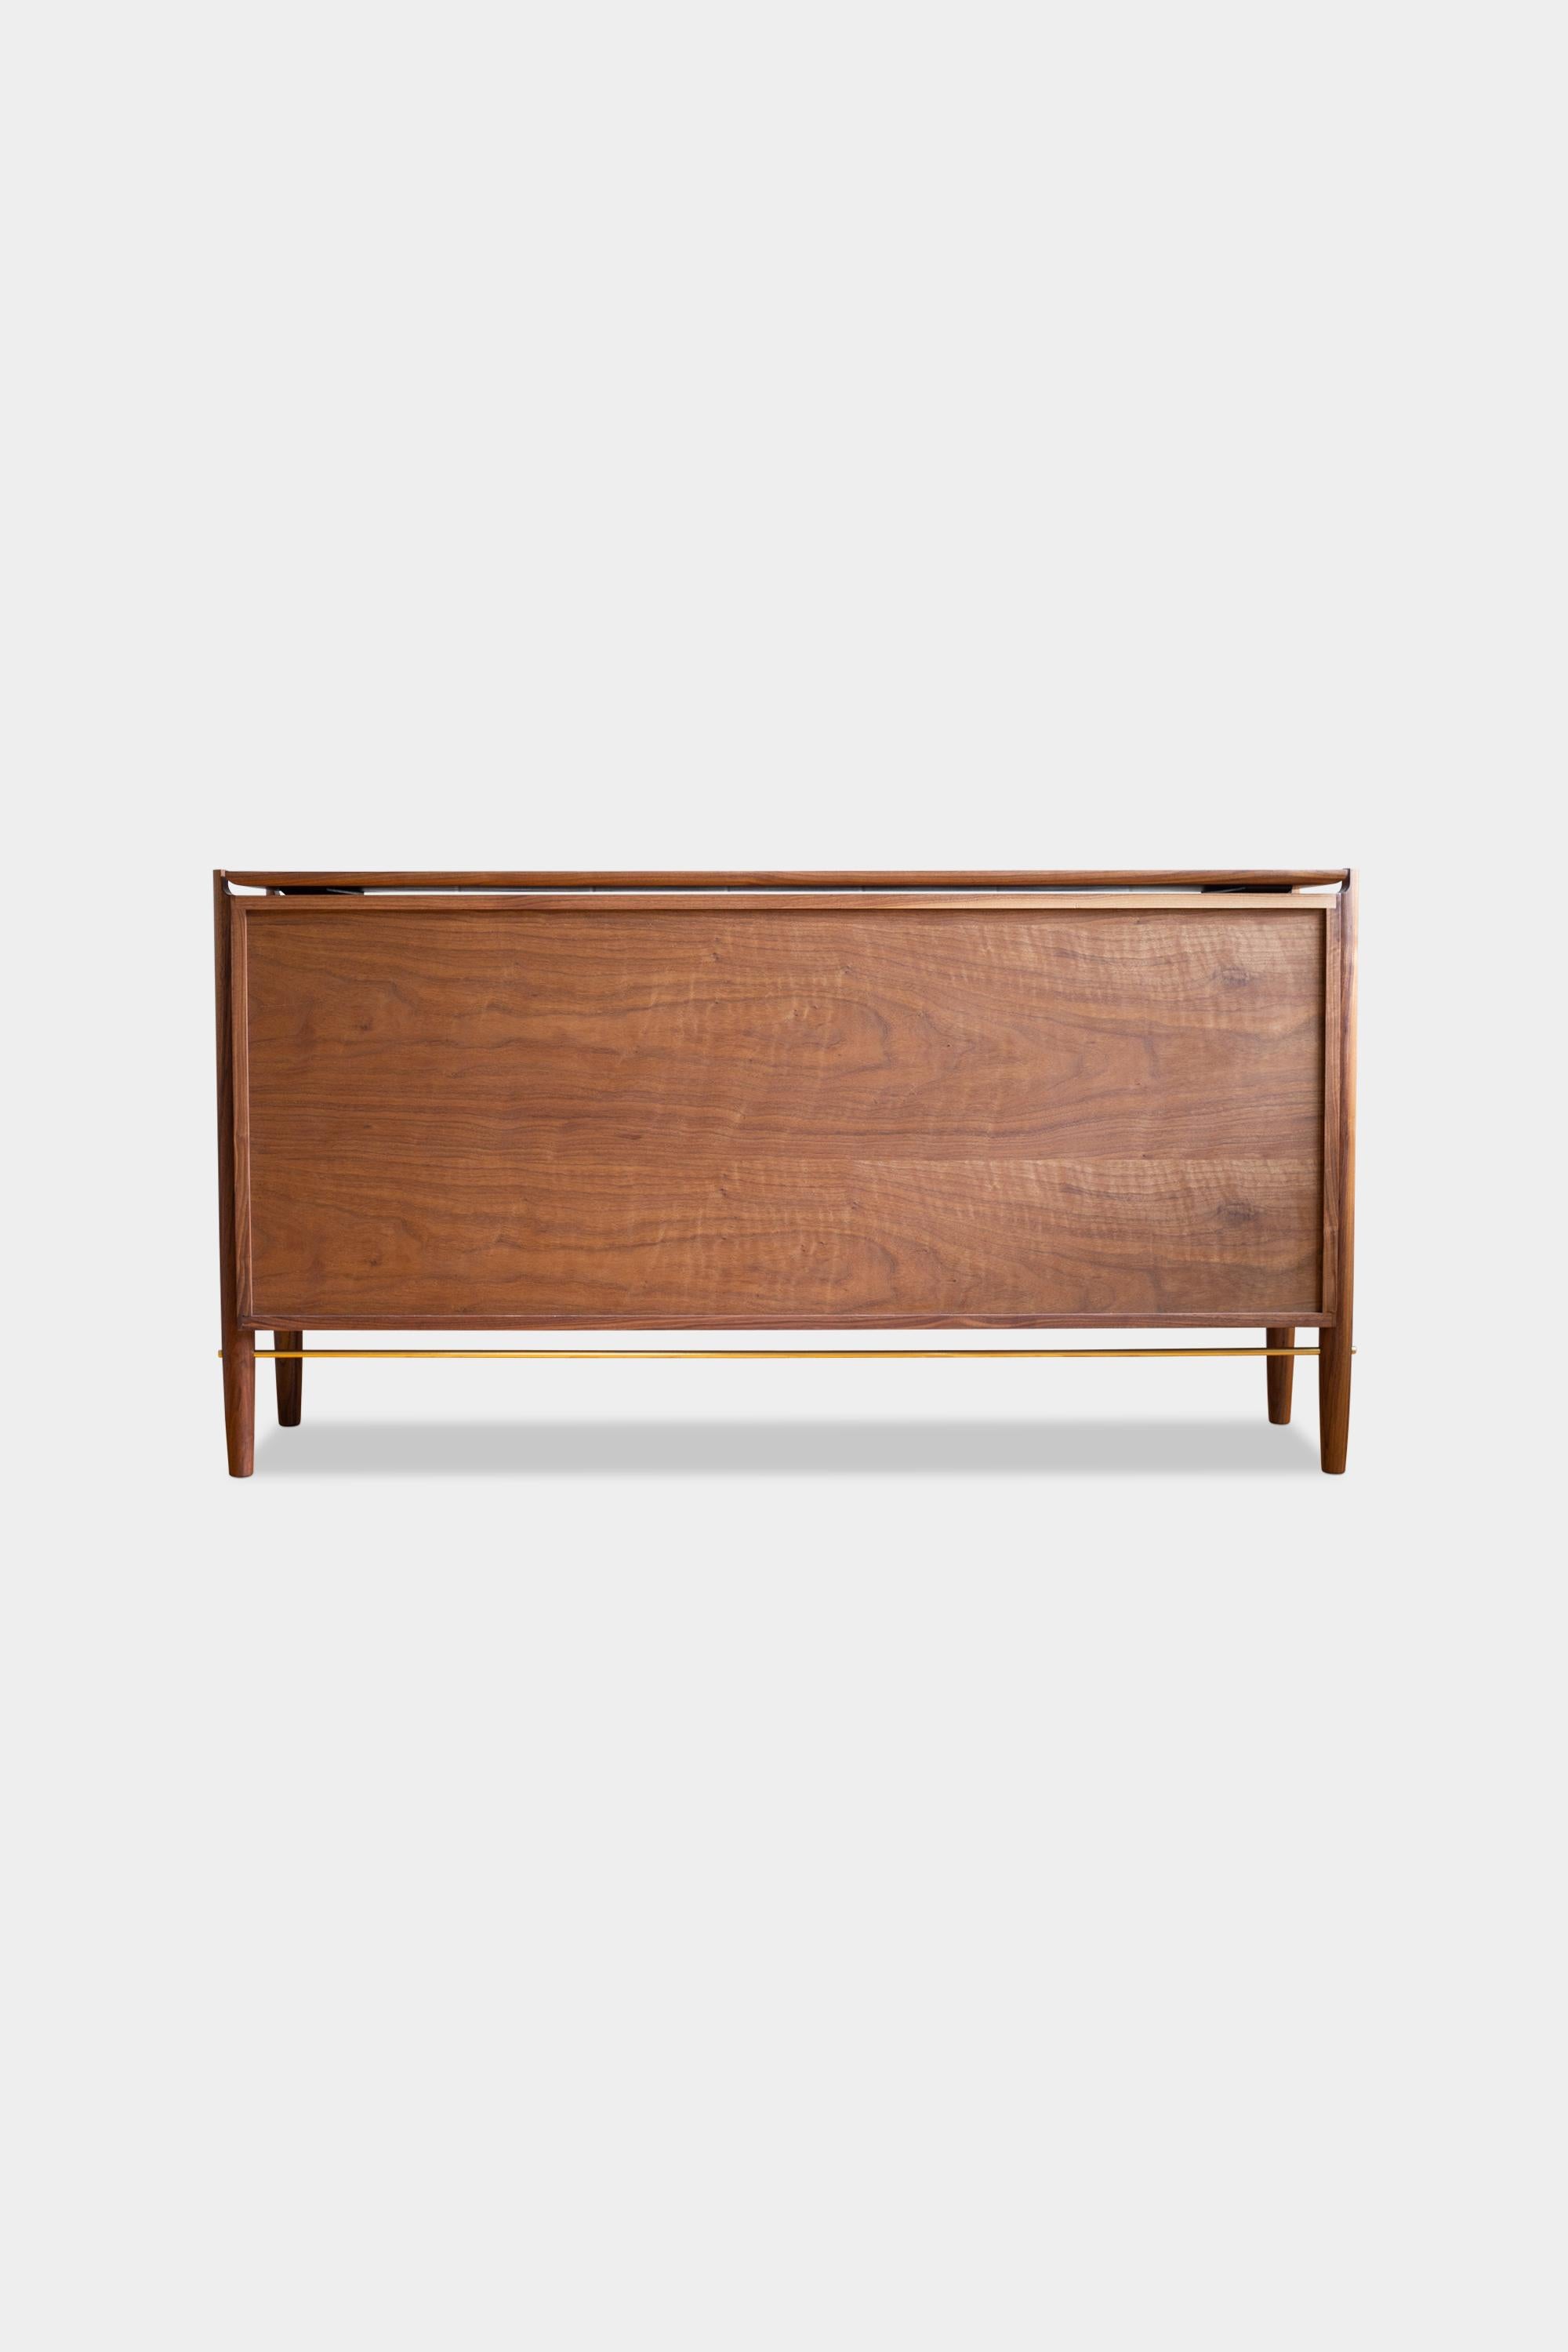 Low KABOT Sideboard in Walnut with 6 Drawers For Sale 1